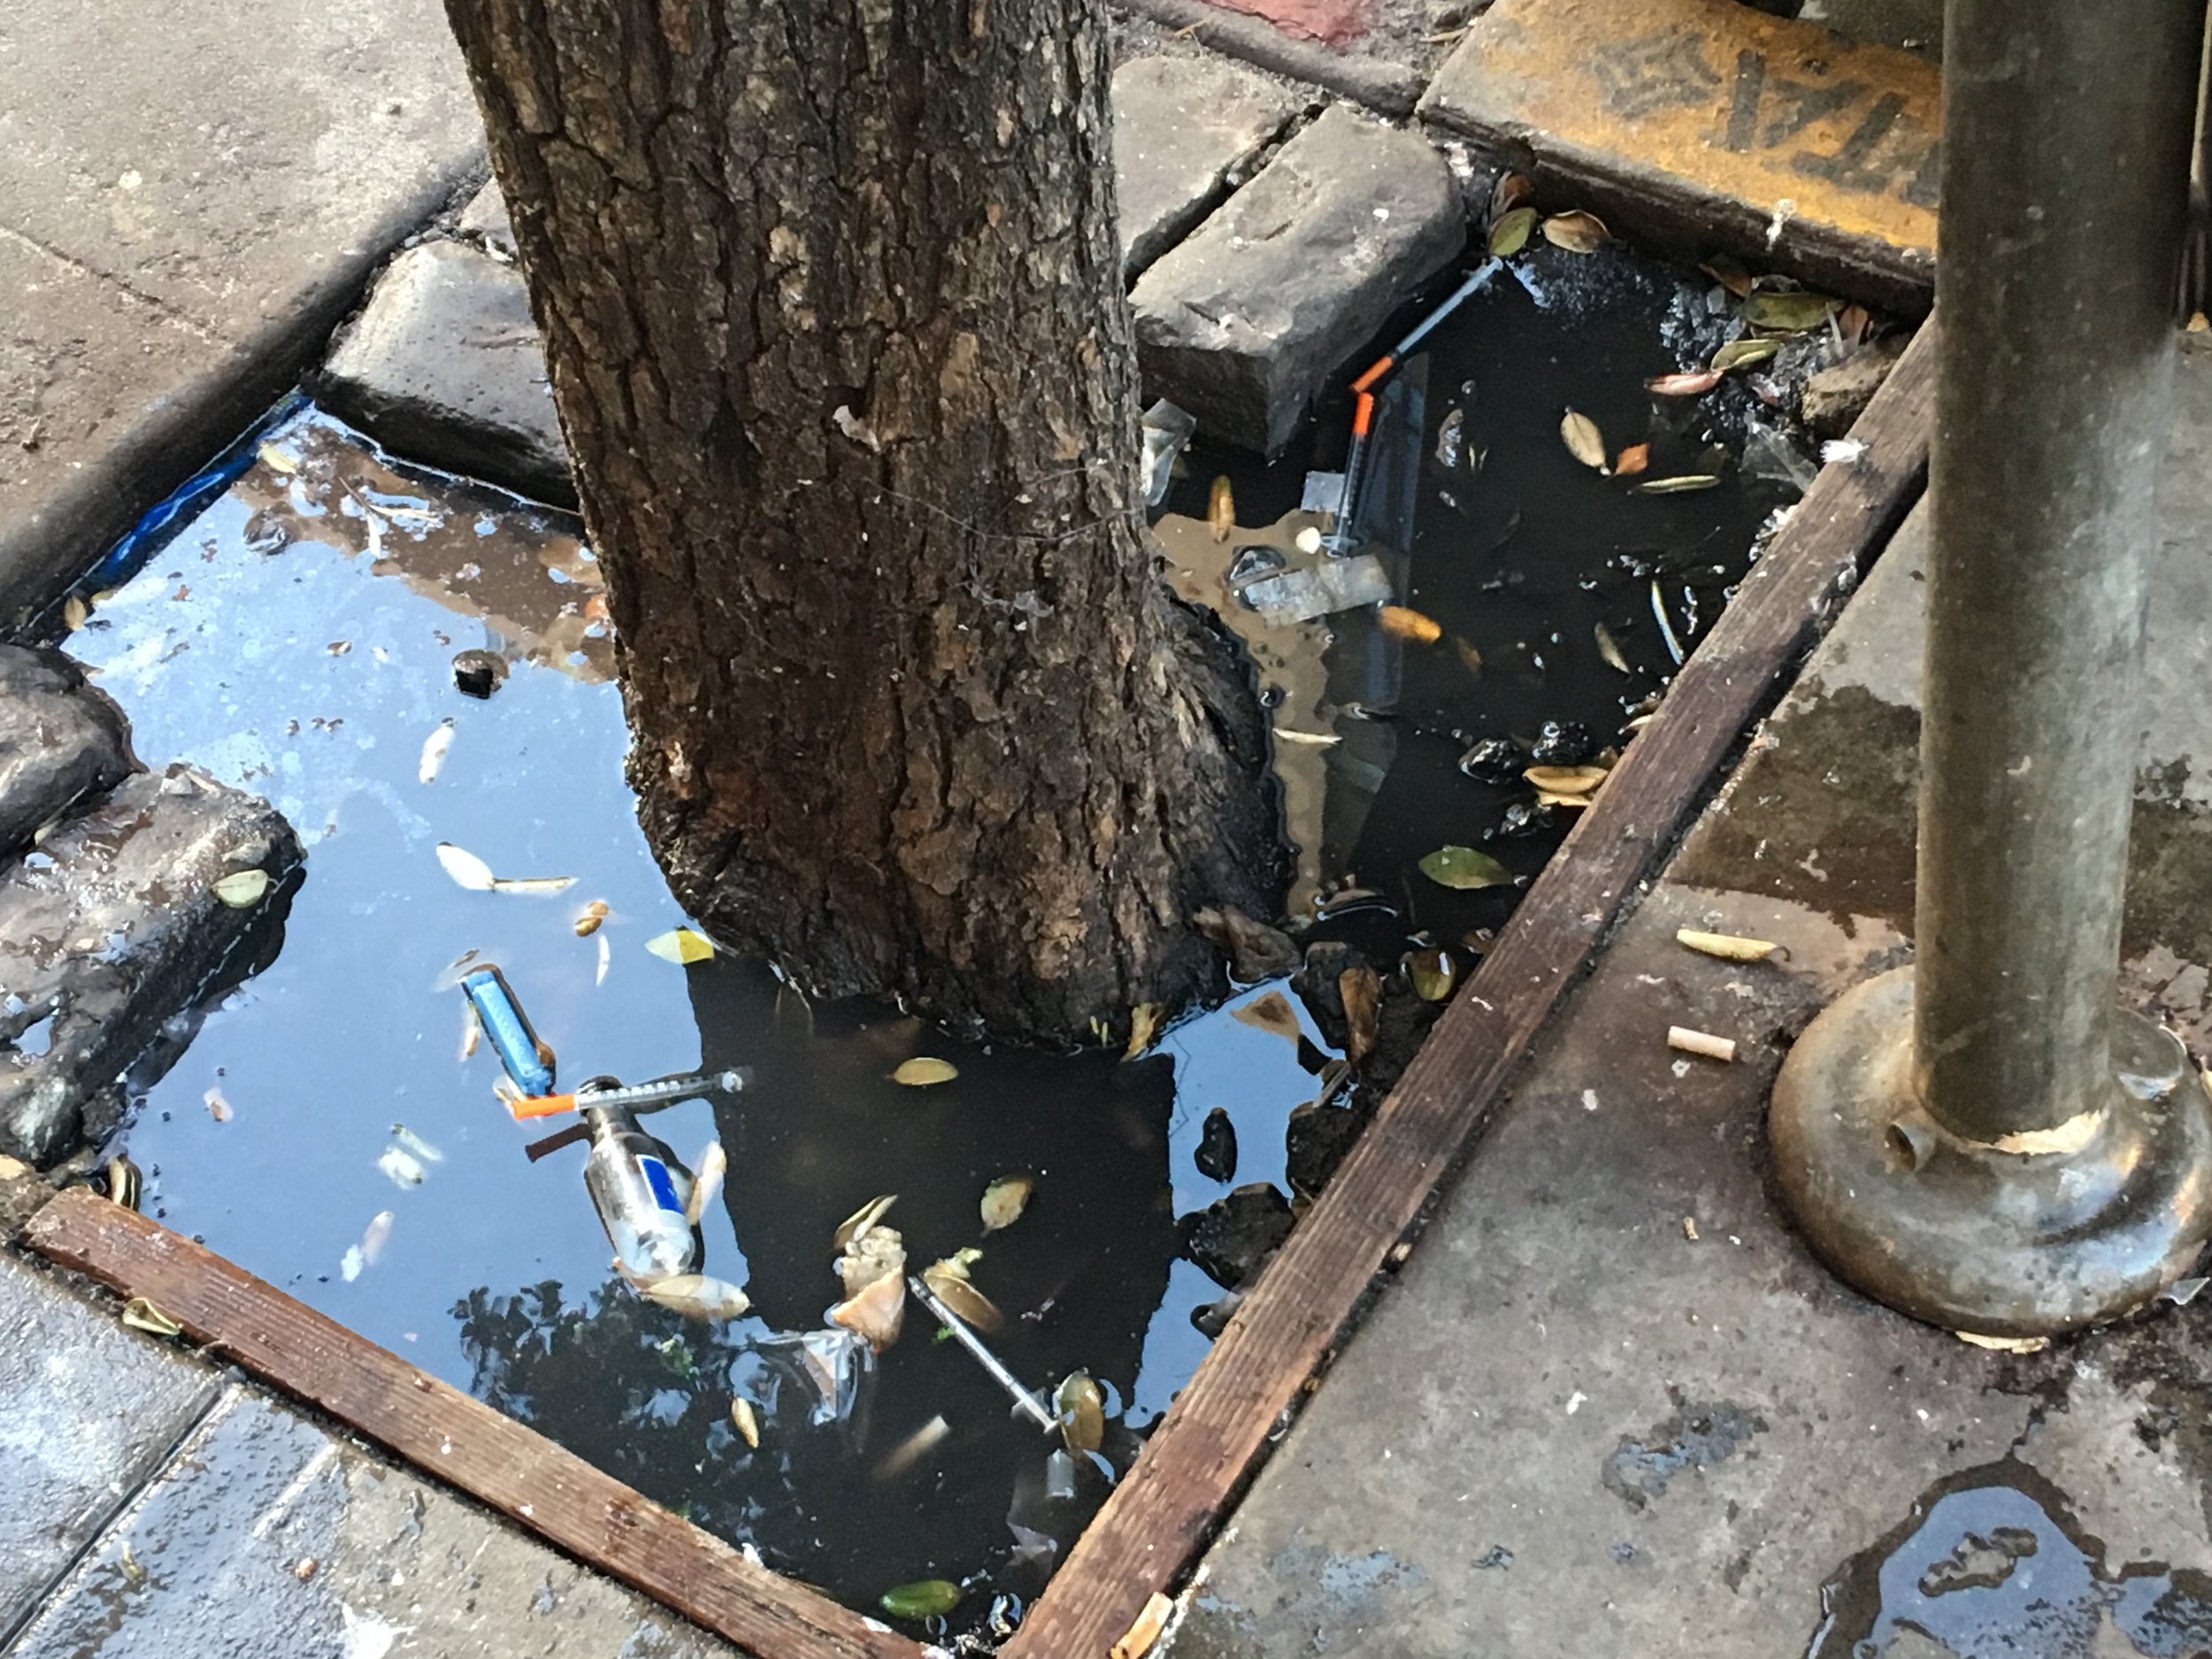 Improperly discarded syringes float in the water of a tree well after the rains. This photo is from the 100 block of Golden Gate Avenue, on the north side of the street. Photo: TLCBD Clean Team